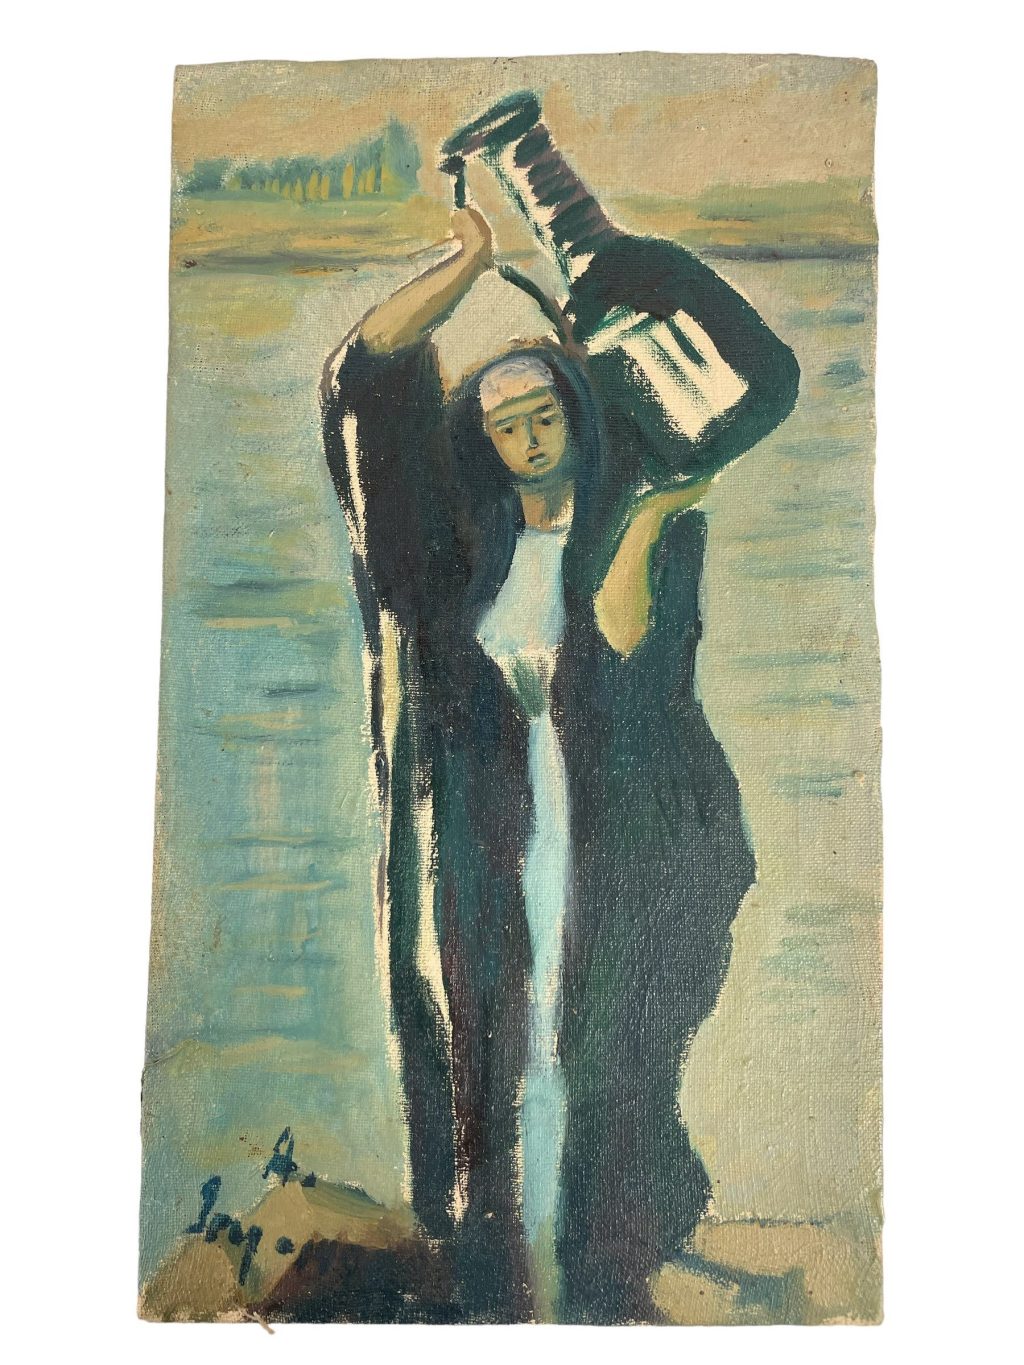 Vintage French Moroccan Arabian Woman Carrying Jug “Water Run” Acrylic Painting On Canvas Wall Decor Decoration c1970’s